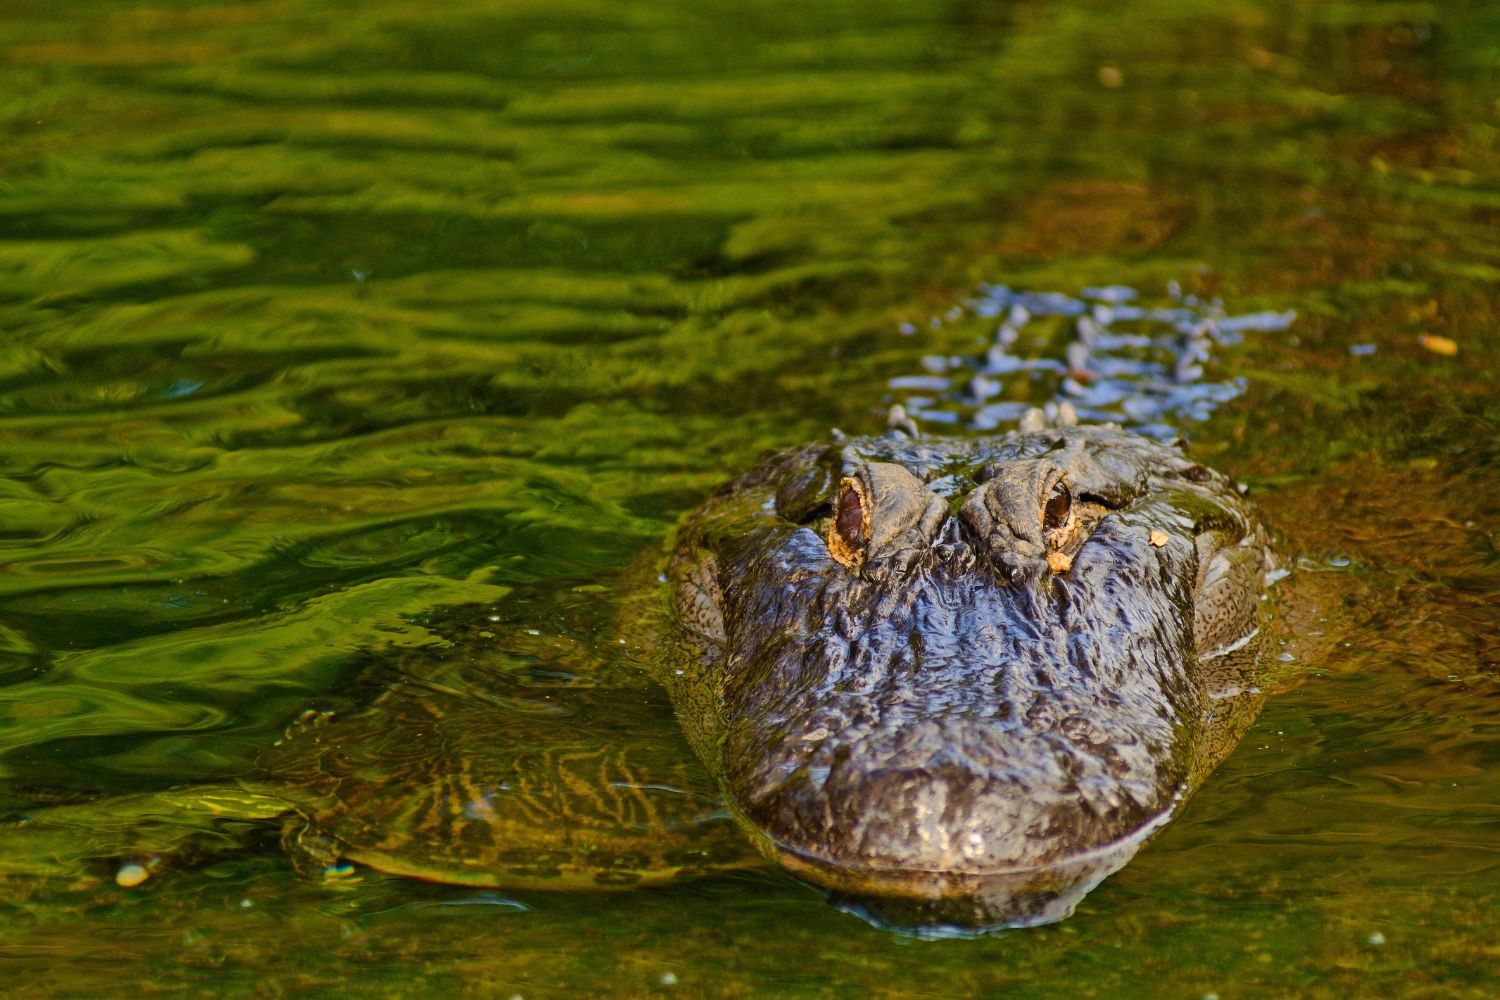 4. Caimans are as sneaky and stealthy as you’d expect.